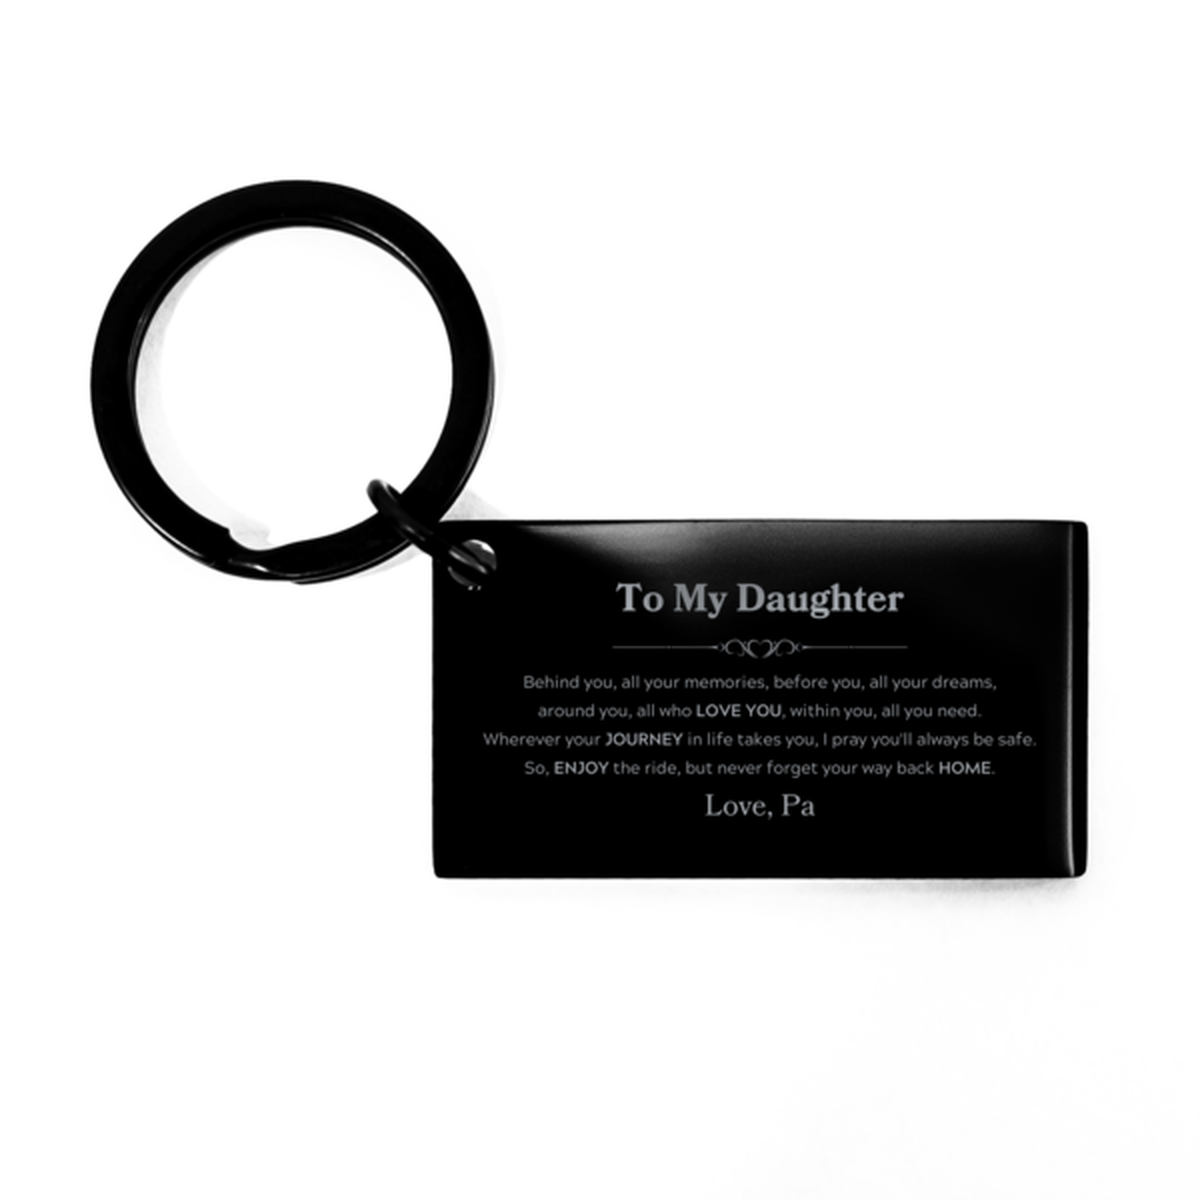 To My Daughter Graduation Gifts from Pa, Daughter Keychain Christmas Birthday Gifts for Daughter Behind you, all your memories, before you, all your dreams. Love, Pa